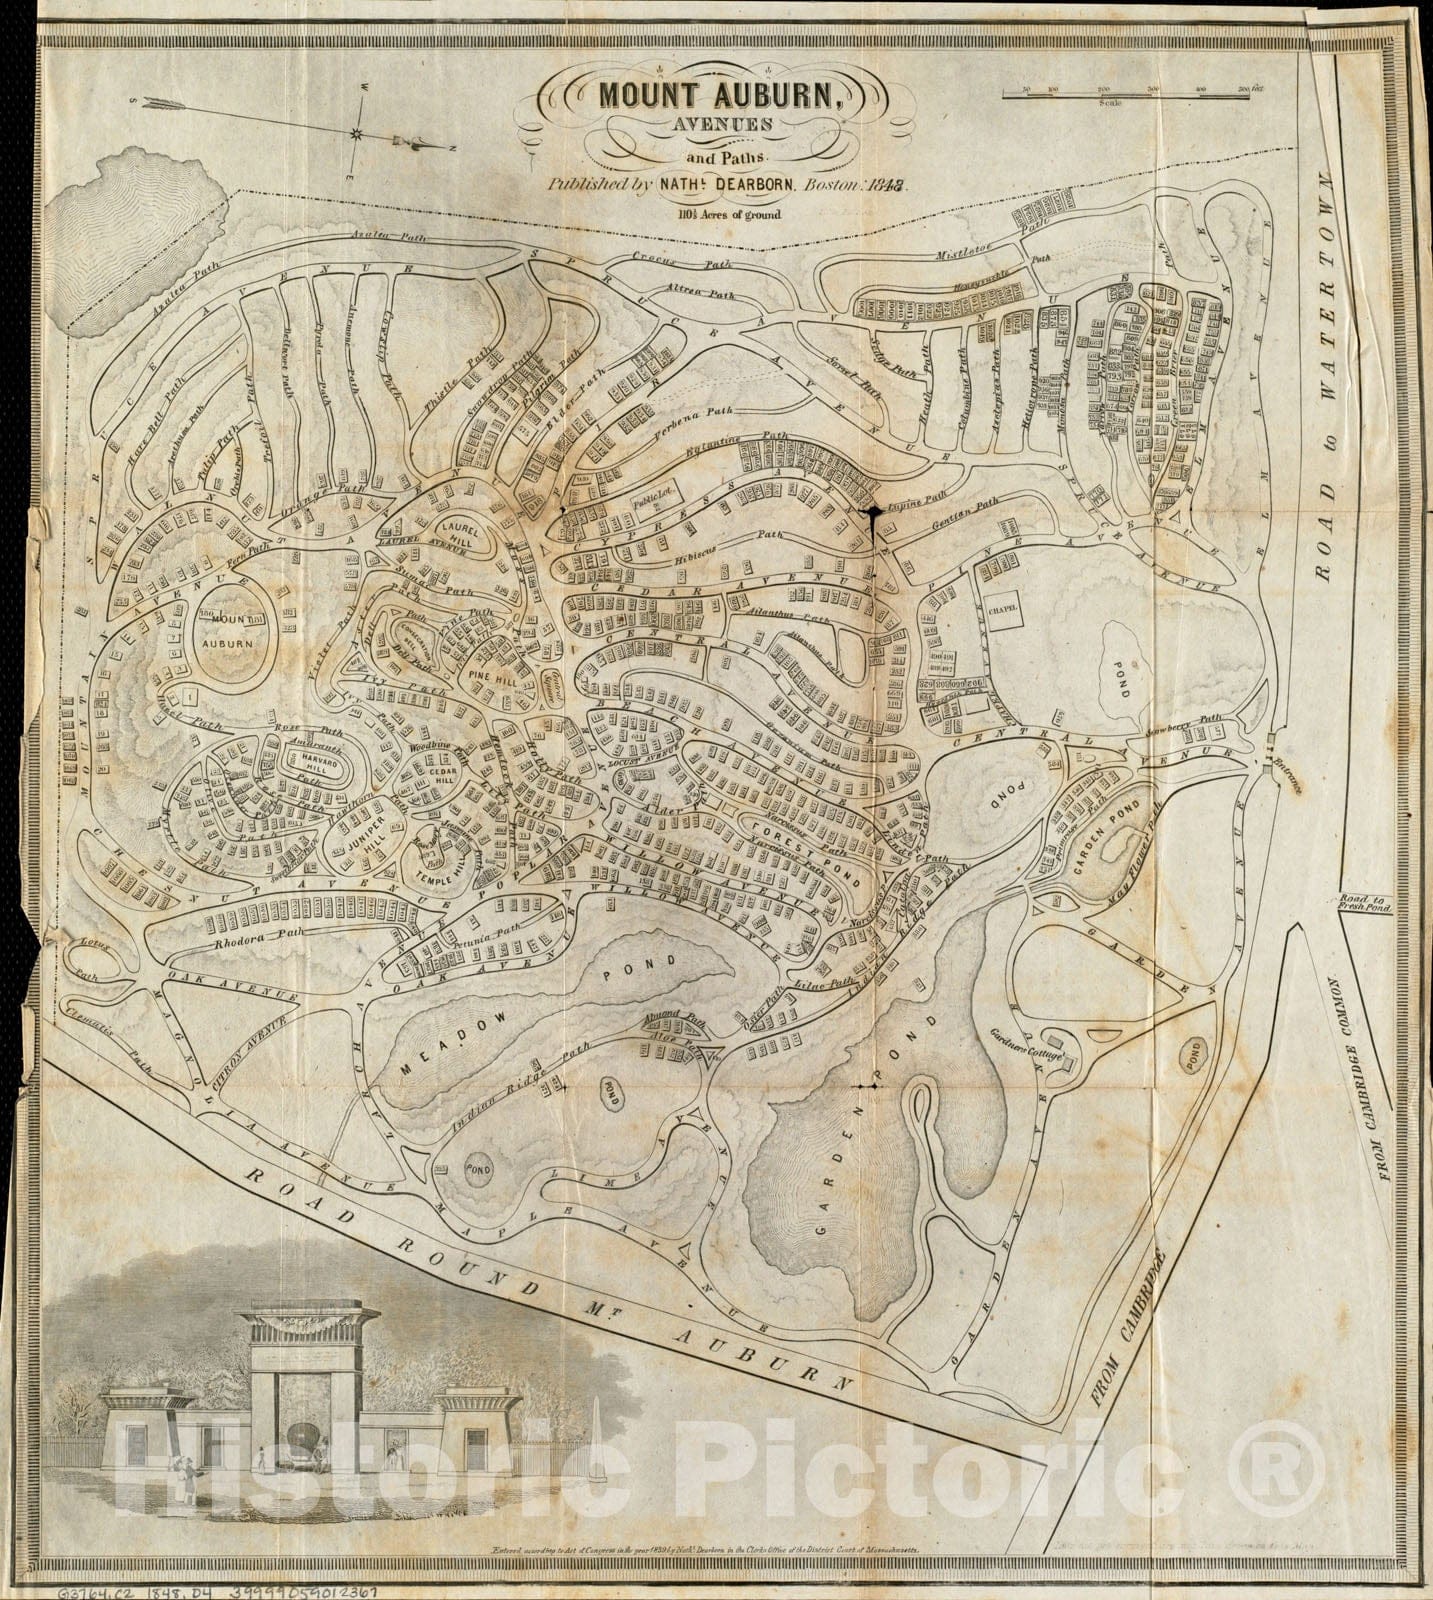 Historical Map, 1848 Mount Auburn, Avenues and Paths, Vintage Wall Art